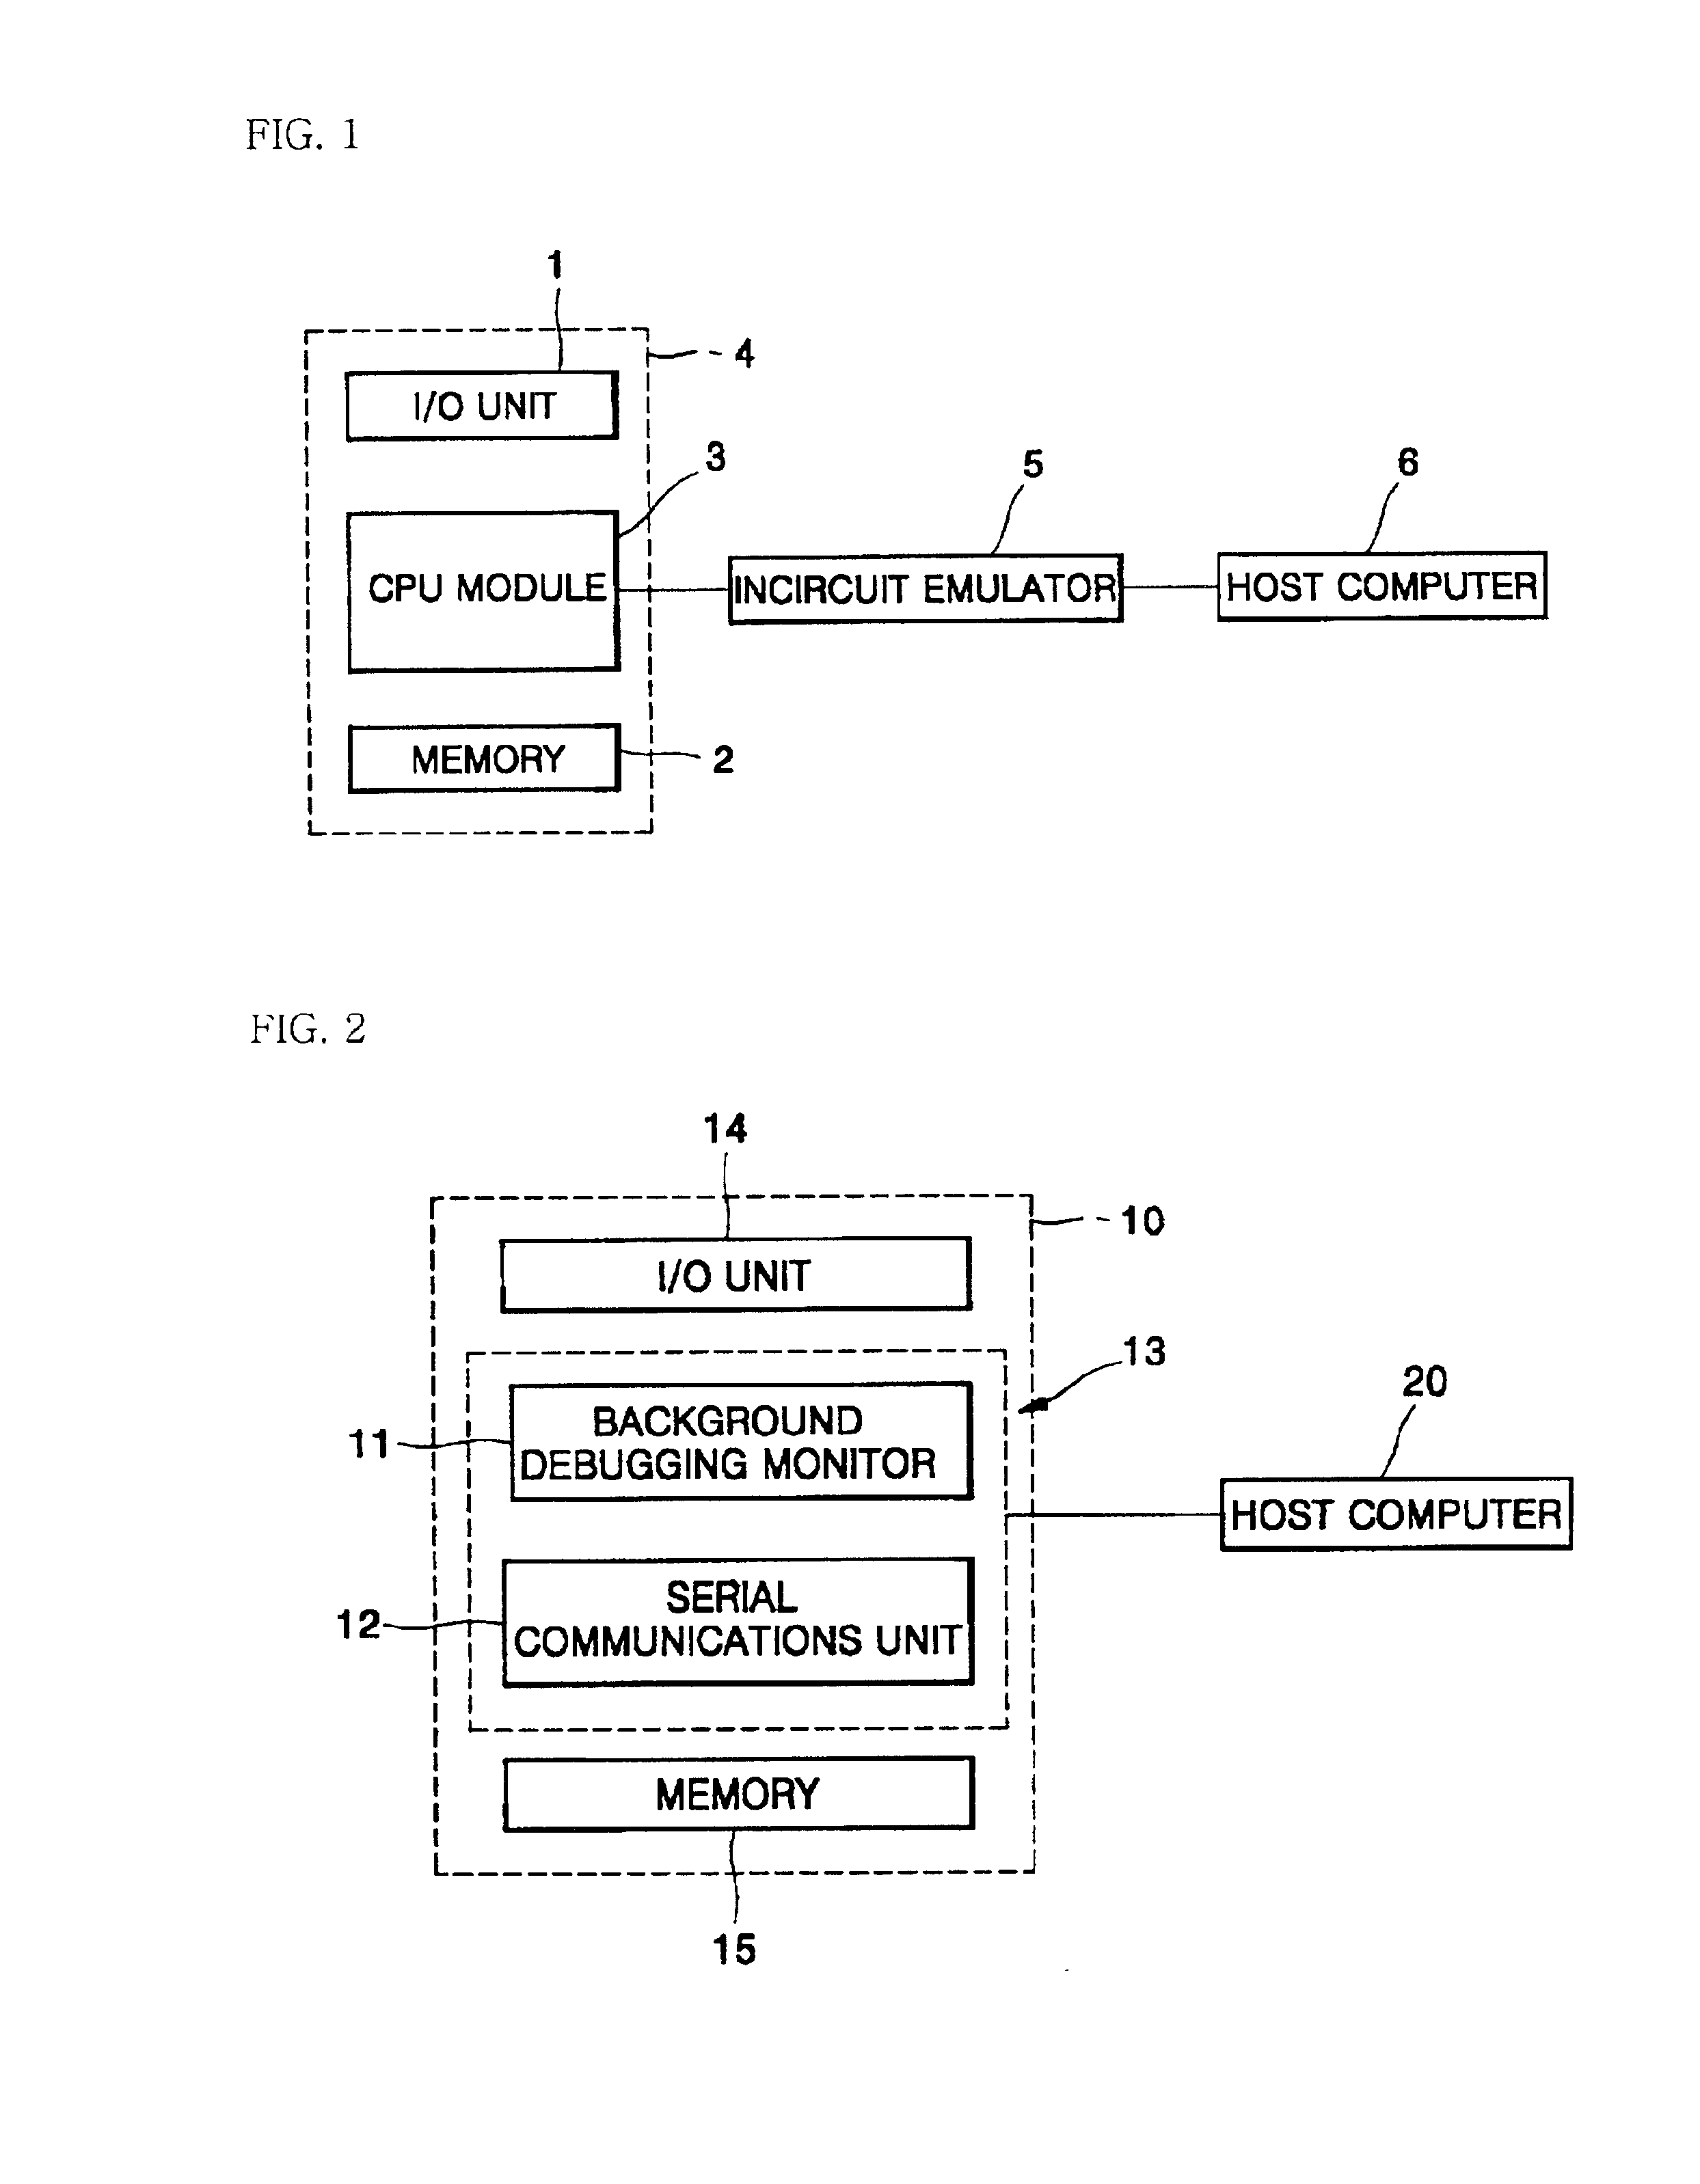 Central processing unit for easily testing and debugging programs